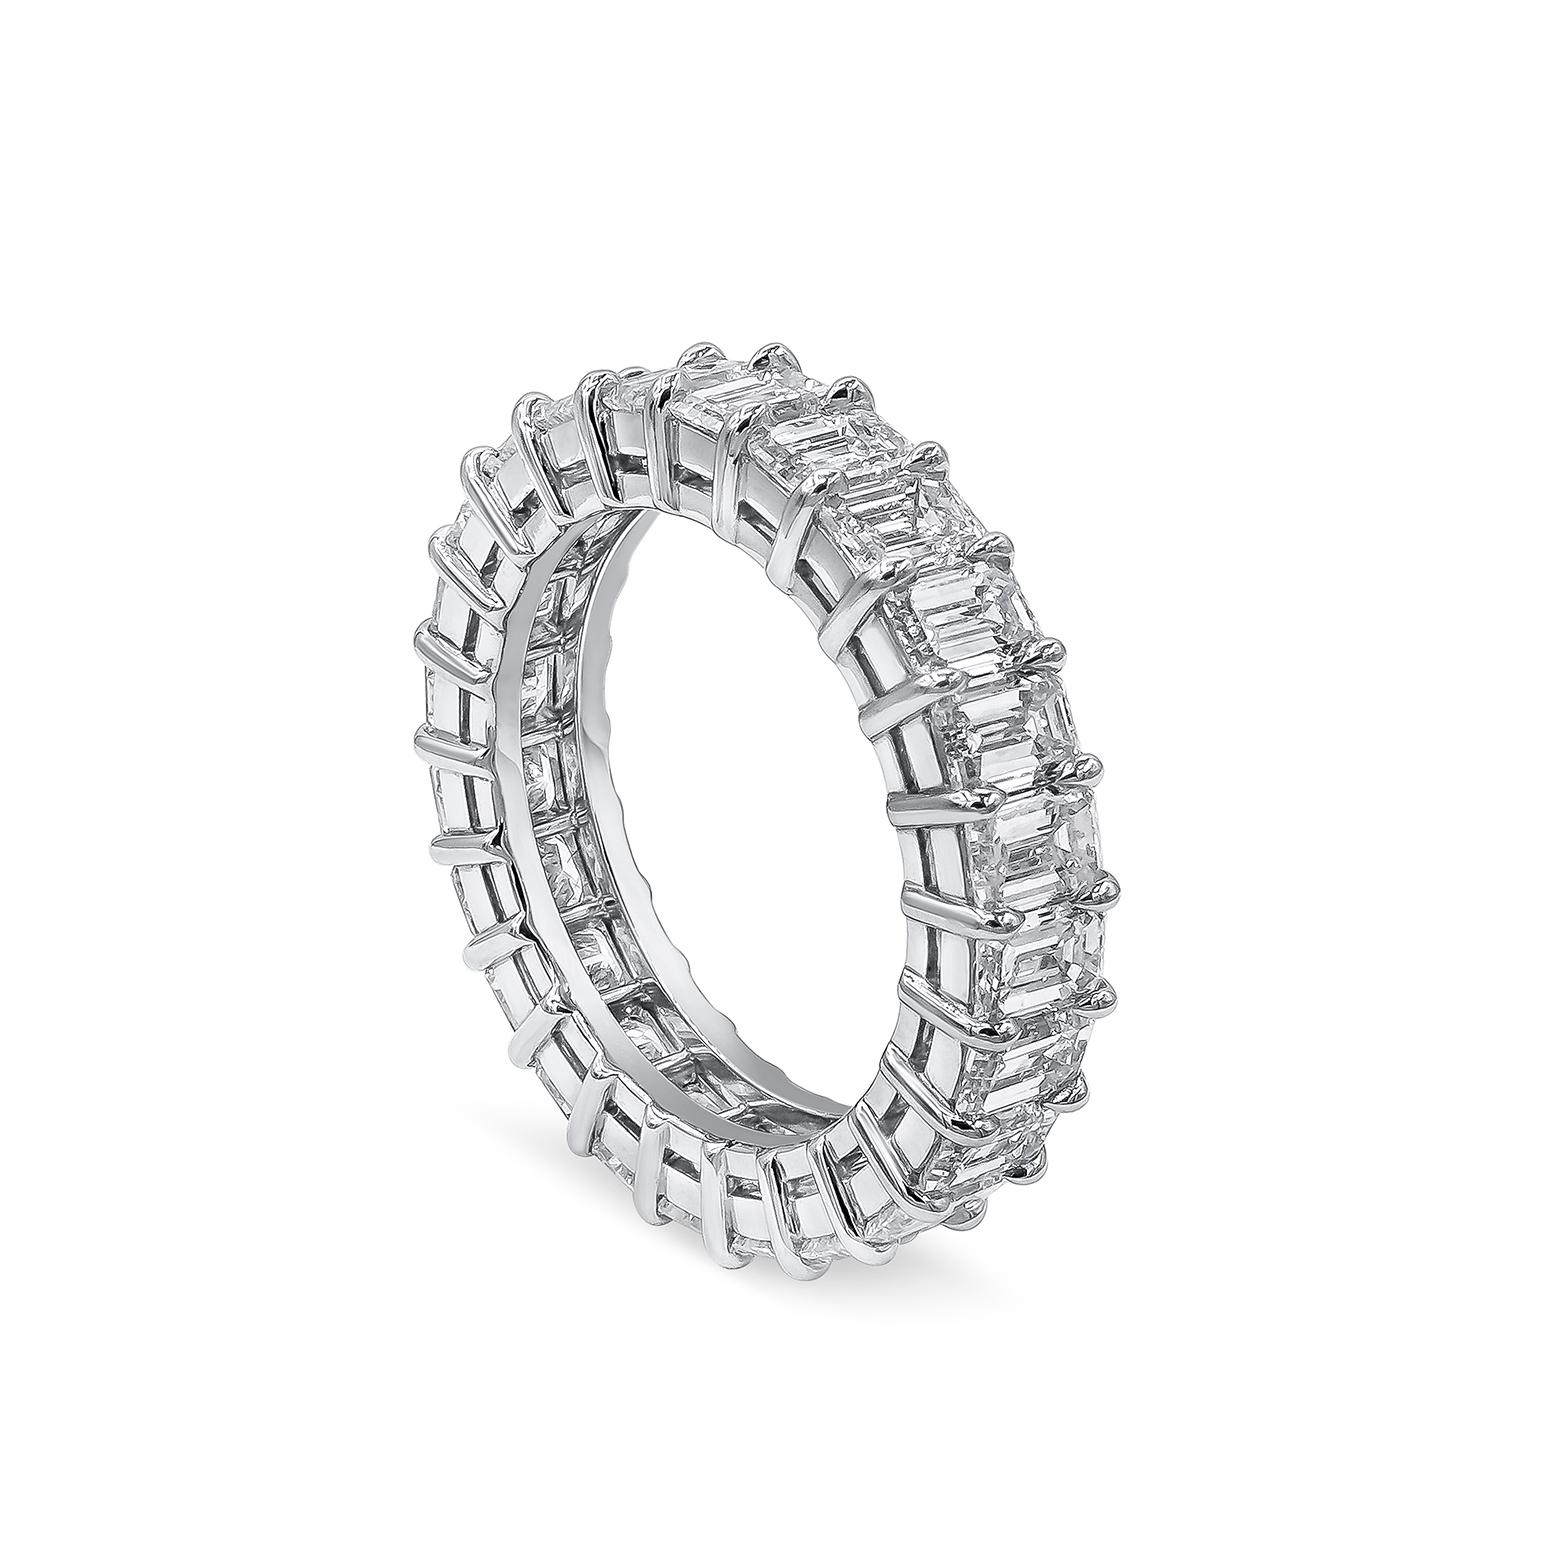 A sophisticated eternity wedding band showcasing emerald cut diamonds weighing 4.58 carats total, set in an open gallery platinum mounting. Diamonds are approximately D-F color and VS in clarity. Size 5.5 US.

Roman Malakov is a custom house,